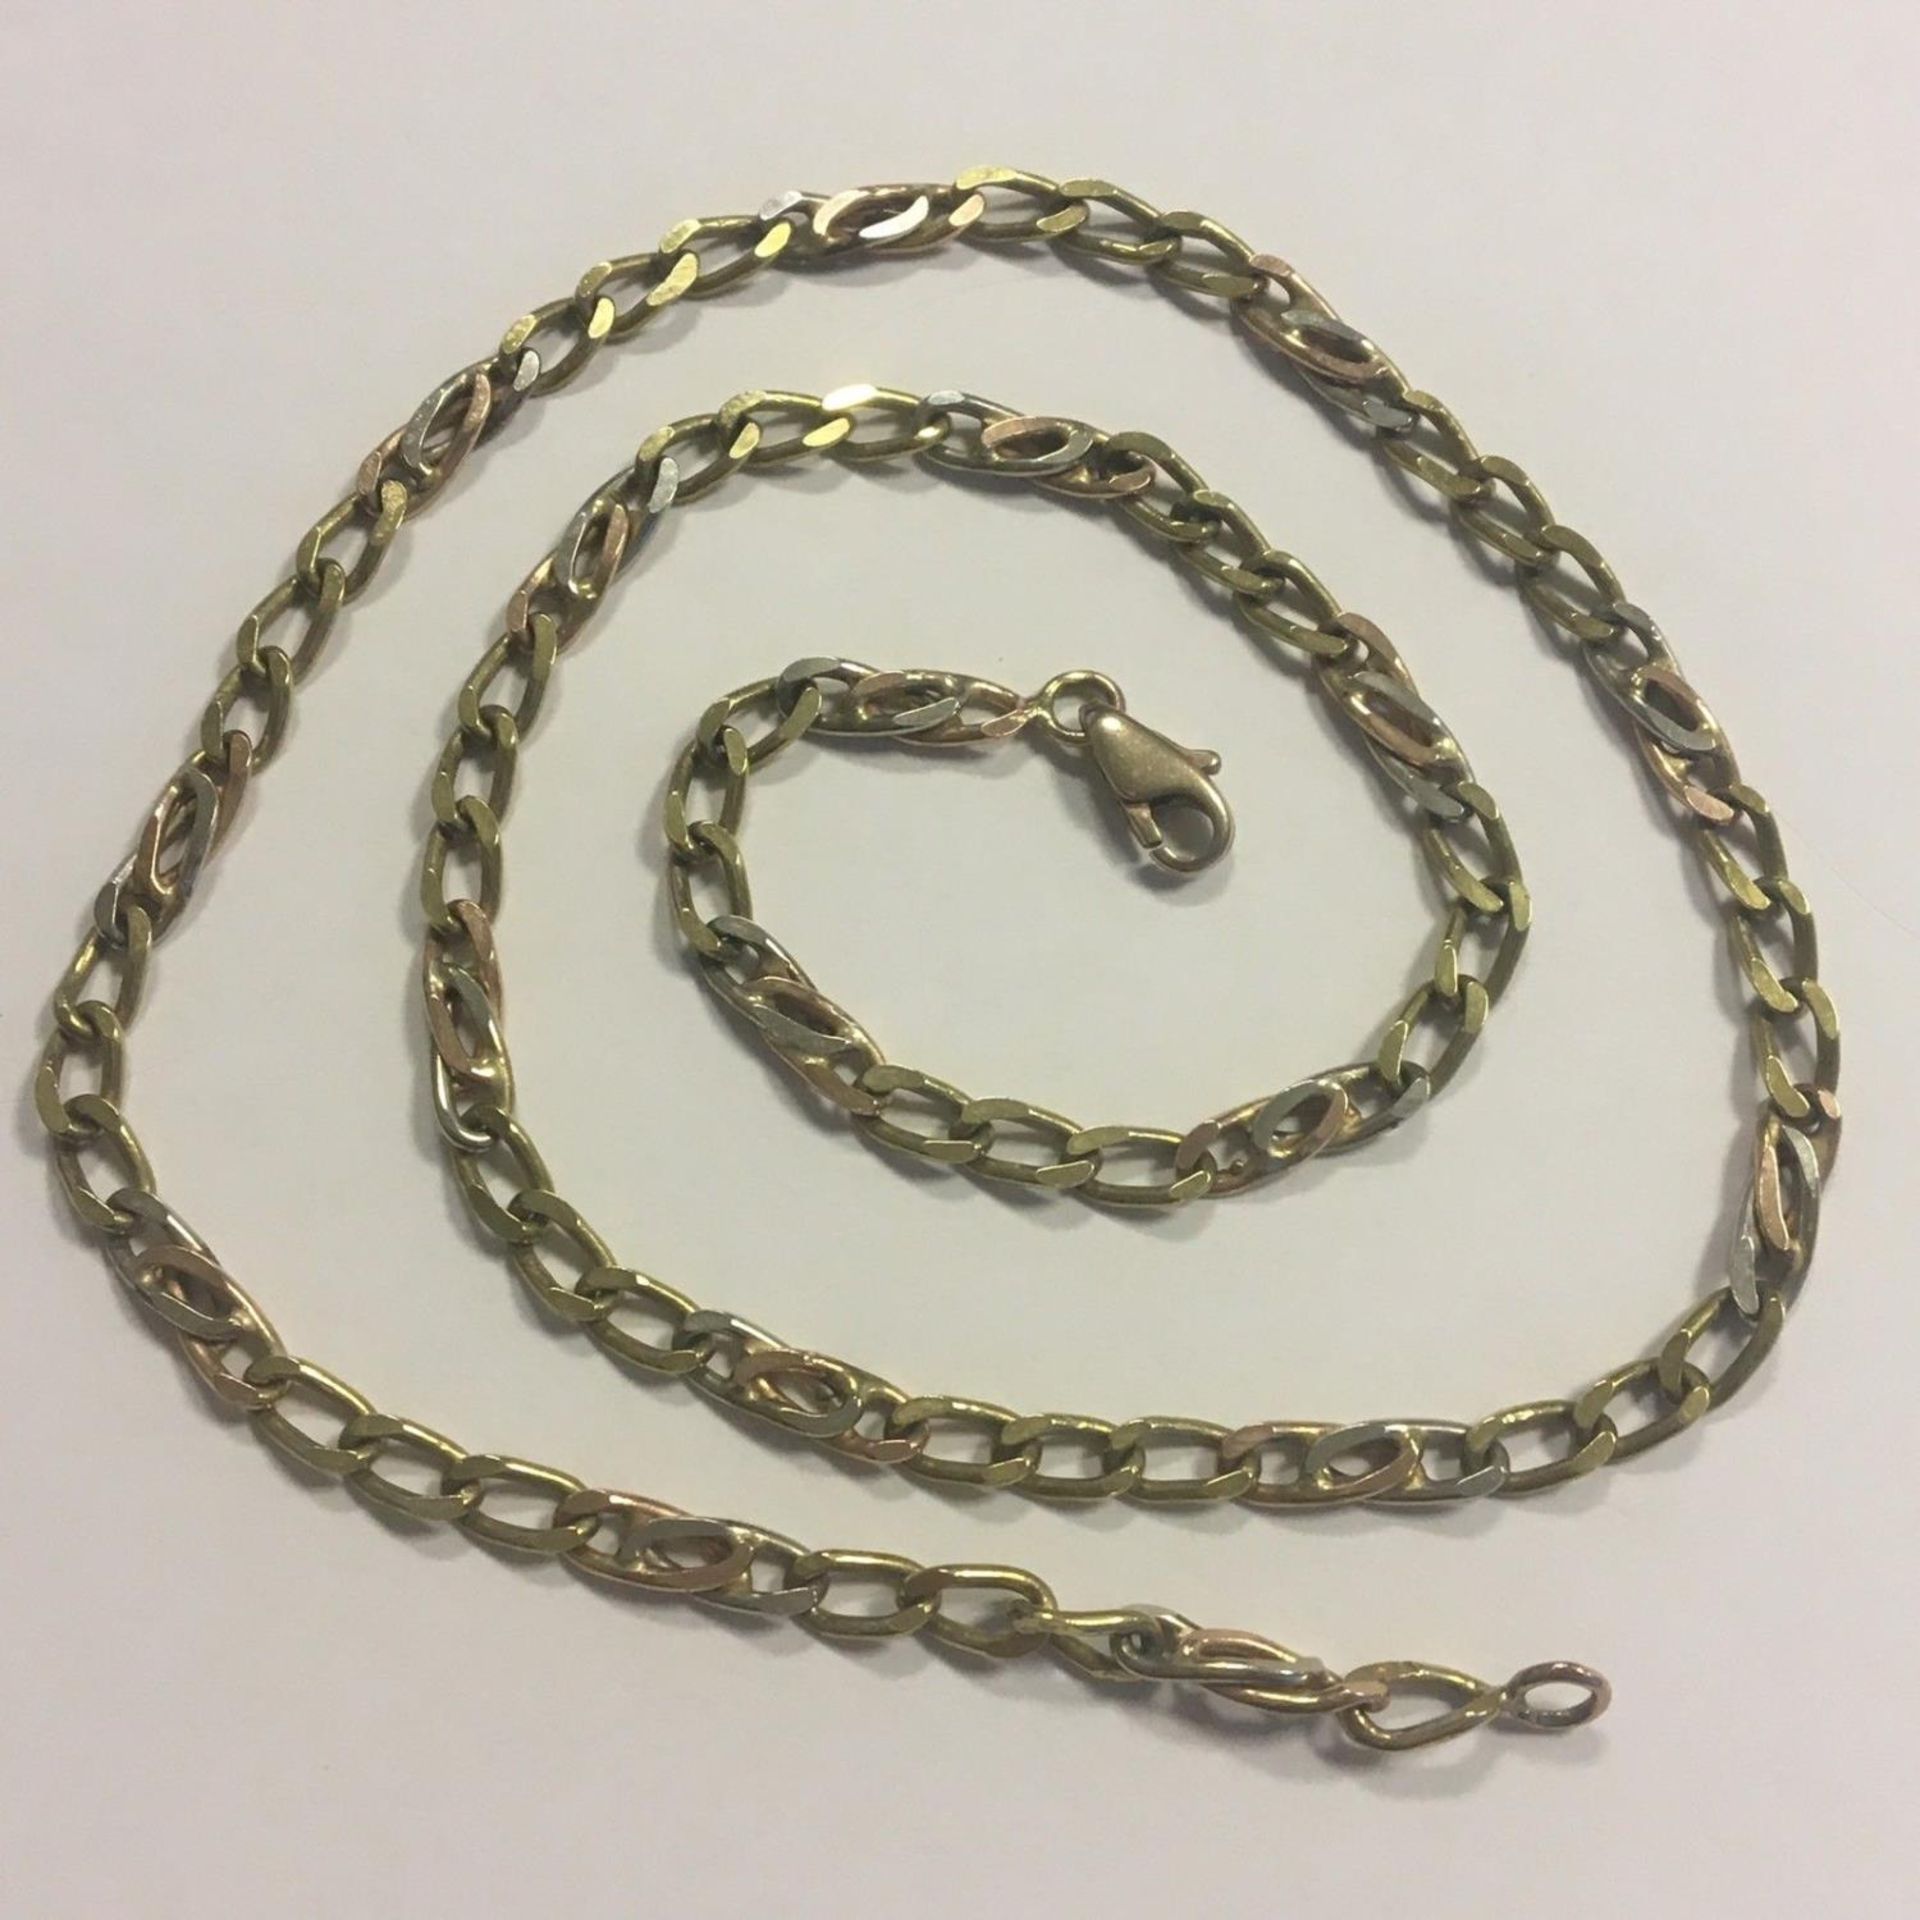 9ct gold 45cm chain yellow gold with rose & white gold detail Weight 12.8 grams